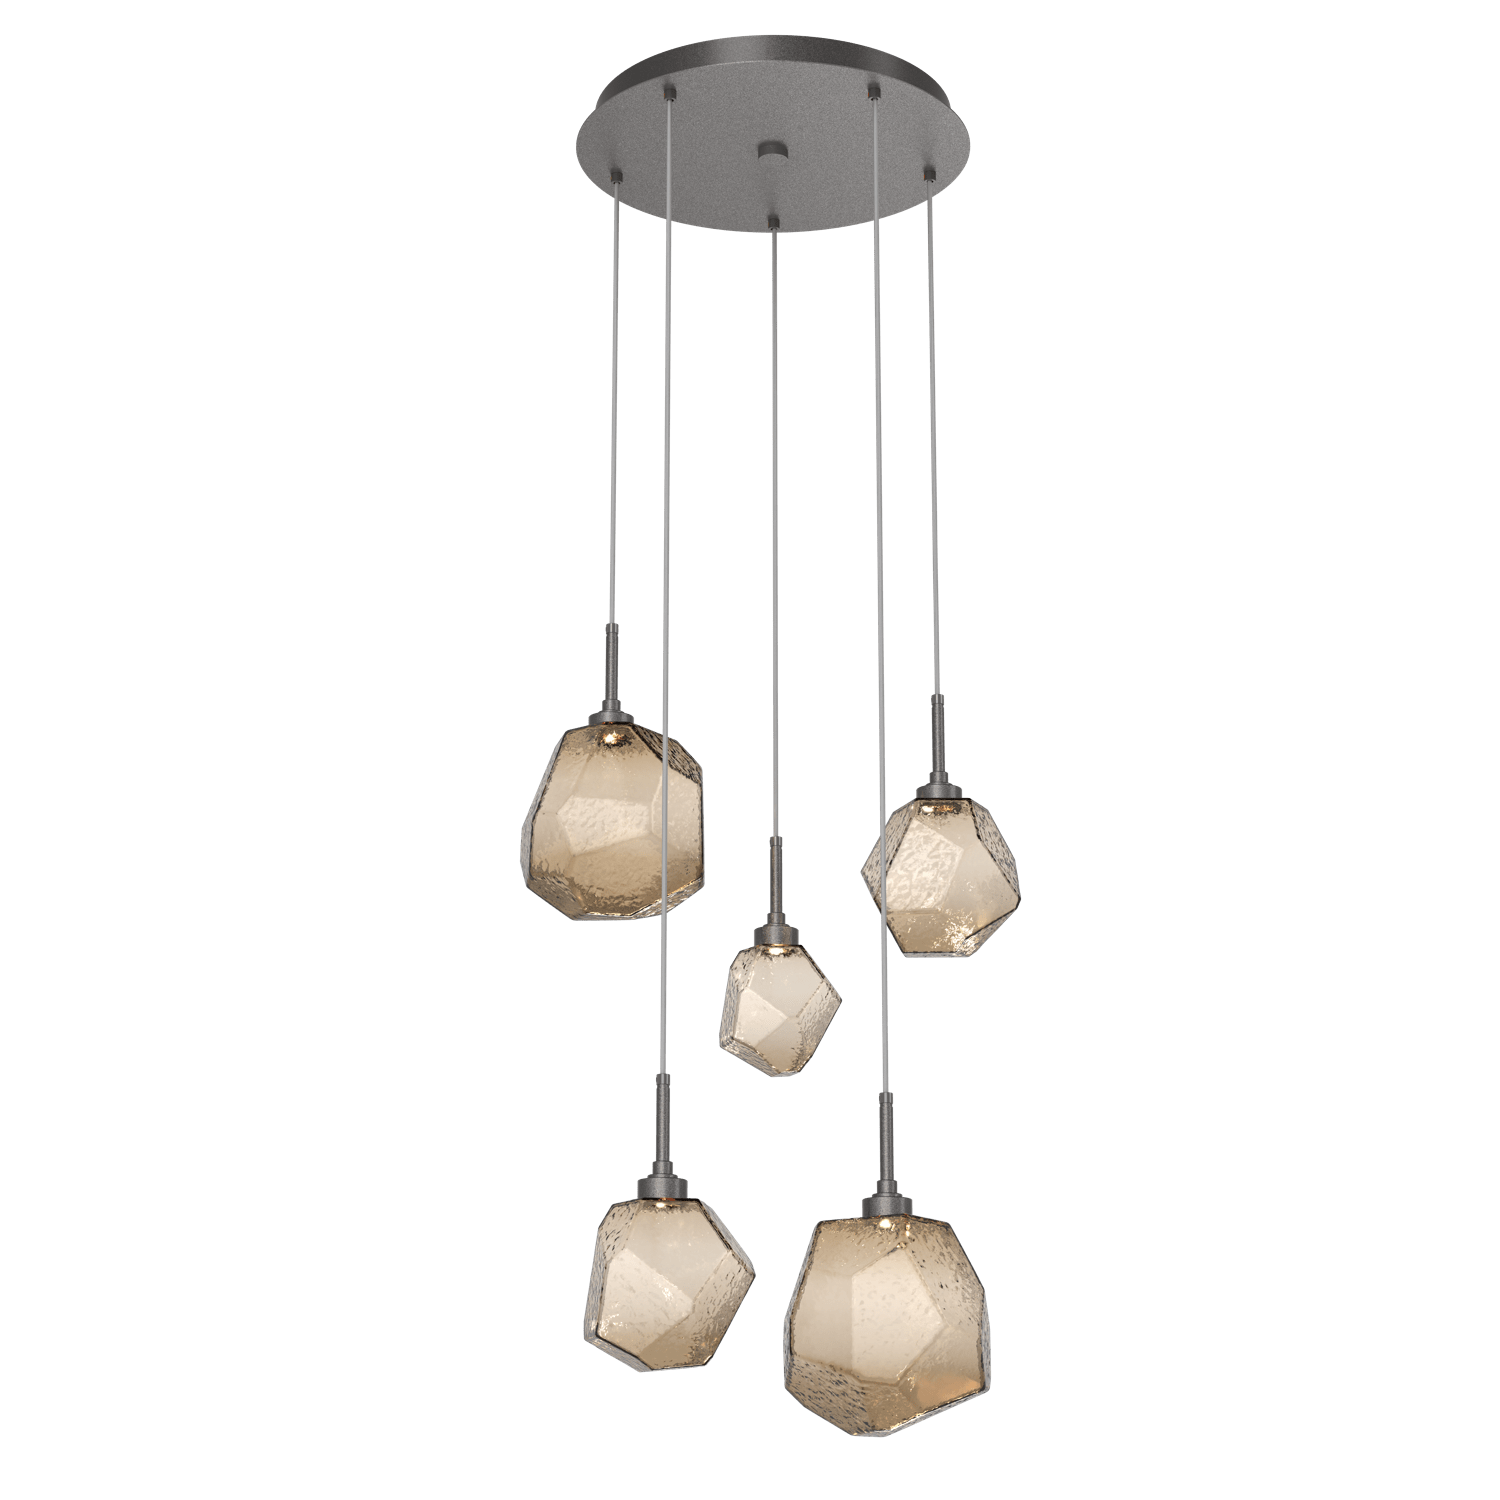 CHB0039-05-GP-B-Hammerton-Studio-Gem-5-light-round-pendant-chandelier-with-graphite-finish-and-bronze-blown-glass-shades-and-LED-lamping